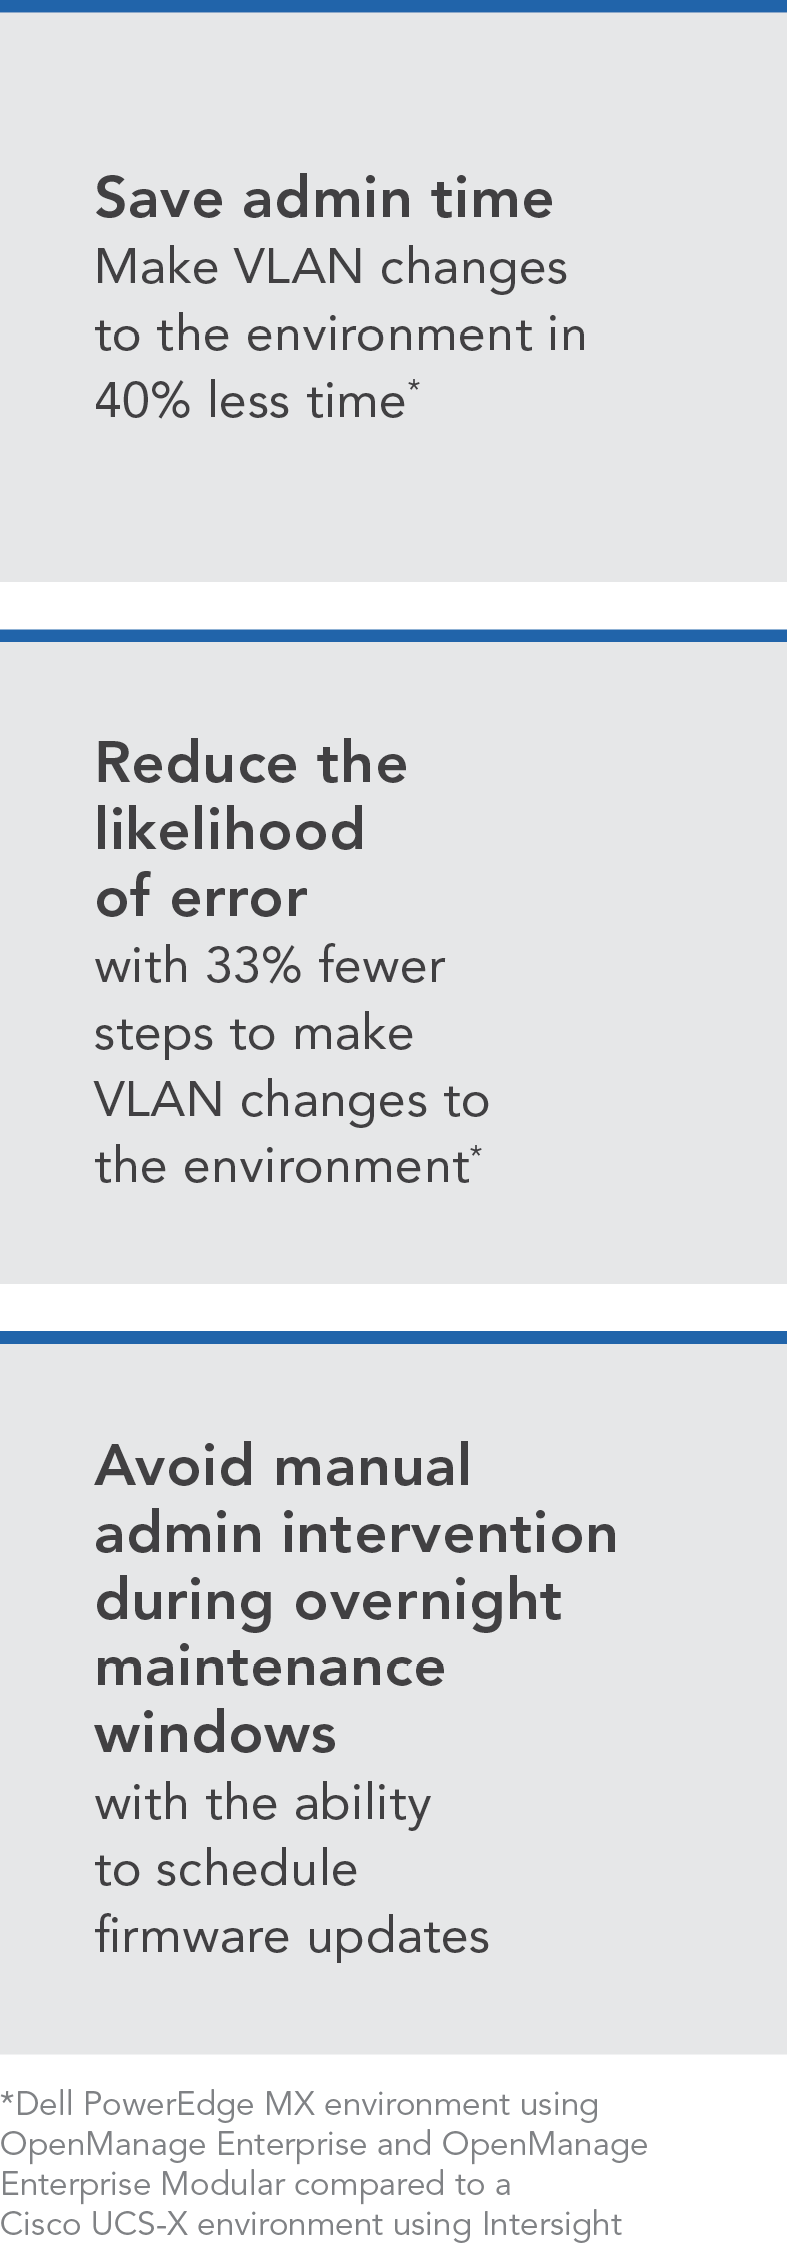 A white box with black text stating the following: Save admin time. Make VLAN changes to the environment in 40% less time. Reduce the likelihood of error with 33% fewer steps to make VLAN changes to the environment. Avoid manual admin intervention during overnight maintenance windows with the ability to schedule firmware updates.